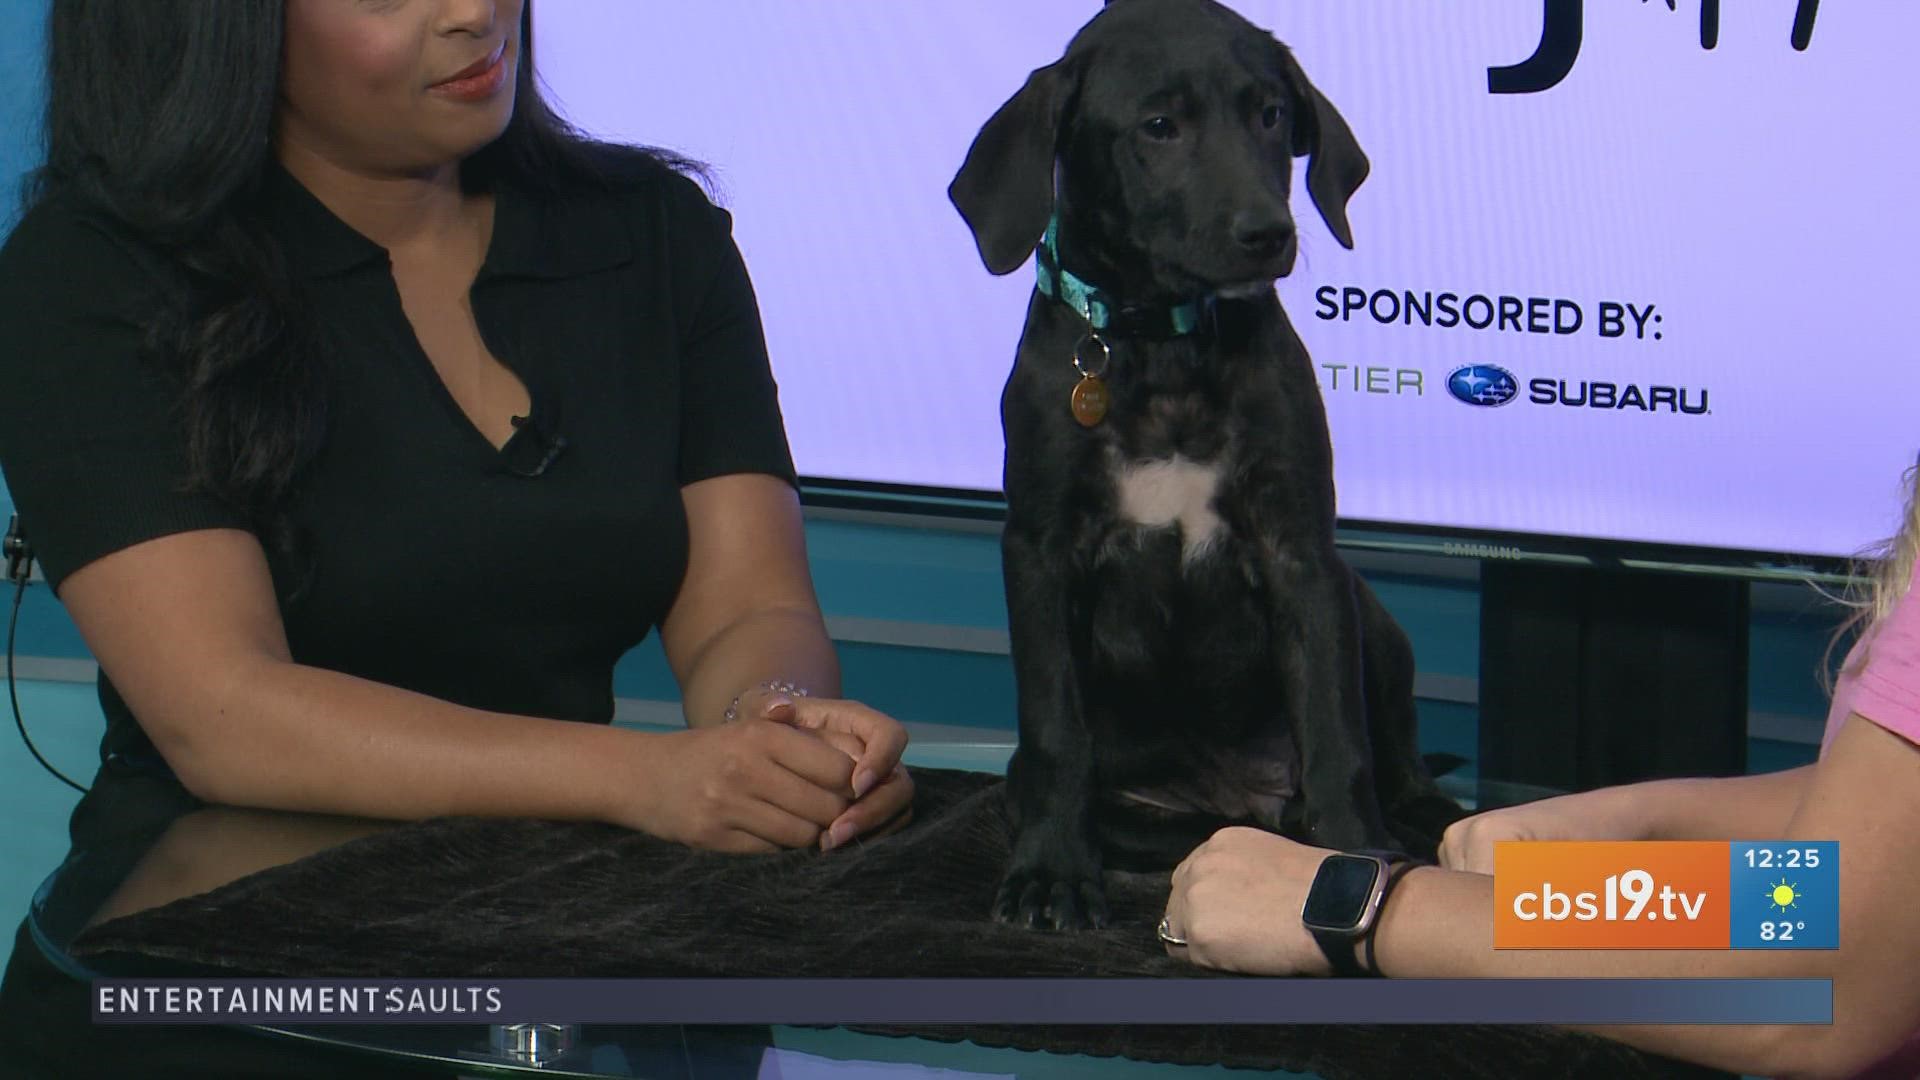 To adopt this sweet pup, visit spcaeasttx.com.